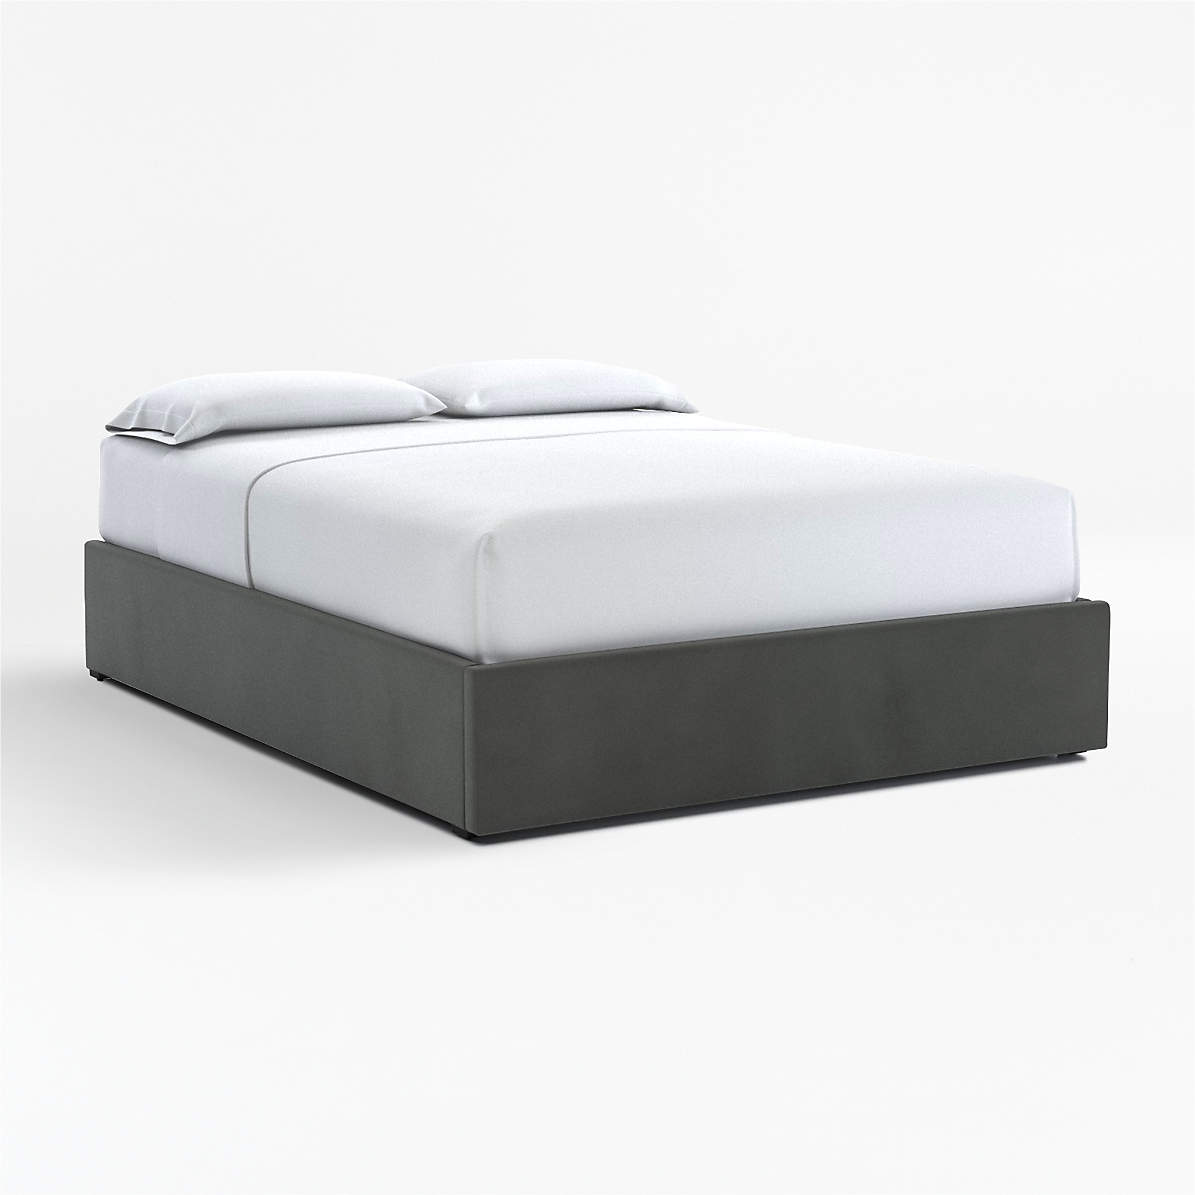 Upholstered Gas Lift Storage Bed Base, Hydraulic Lift Bed King